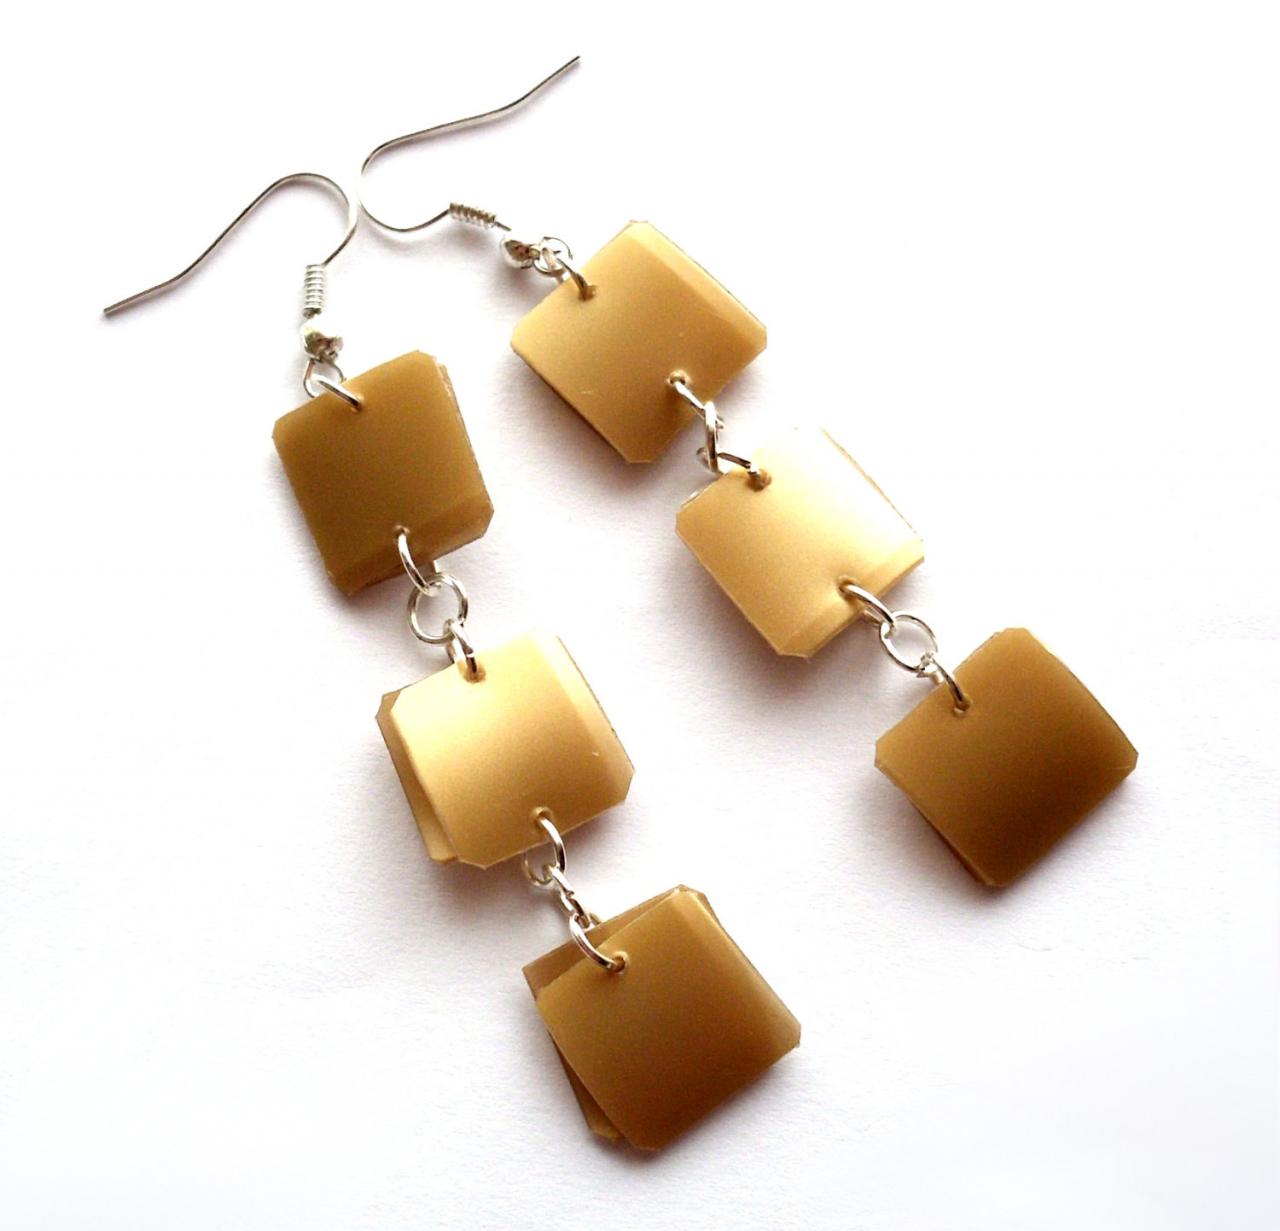 Golden Long Earrings Made Of Recycled Plastic Squares - Upcycled Jewelry, Modern, Geometric, Ecofriendly, Brown, Boho